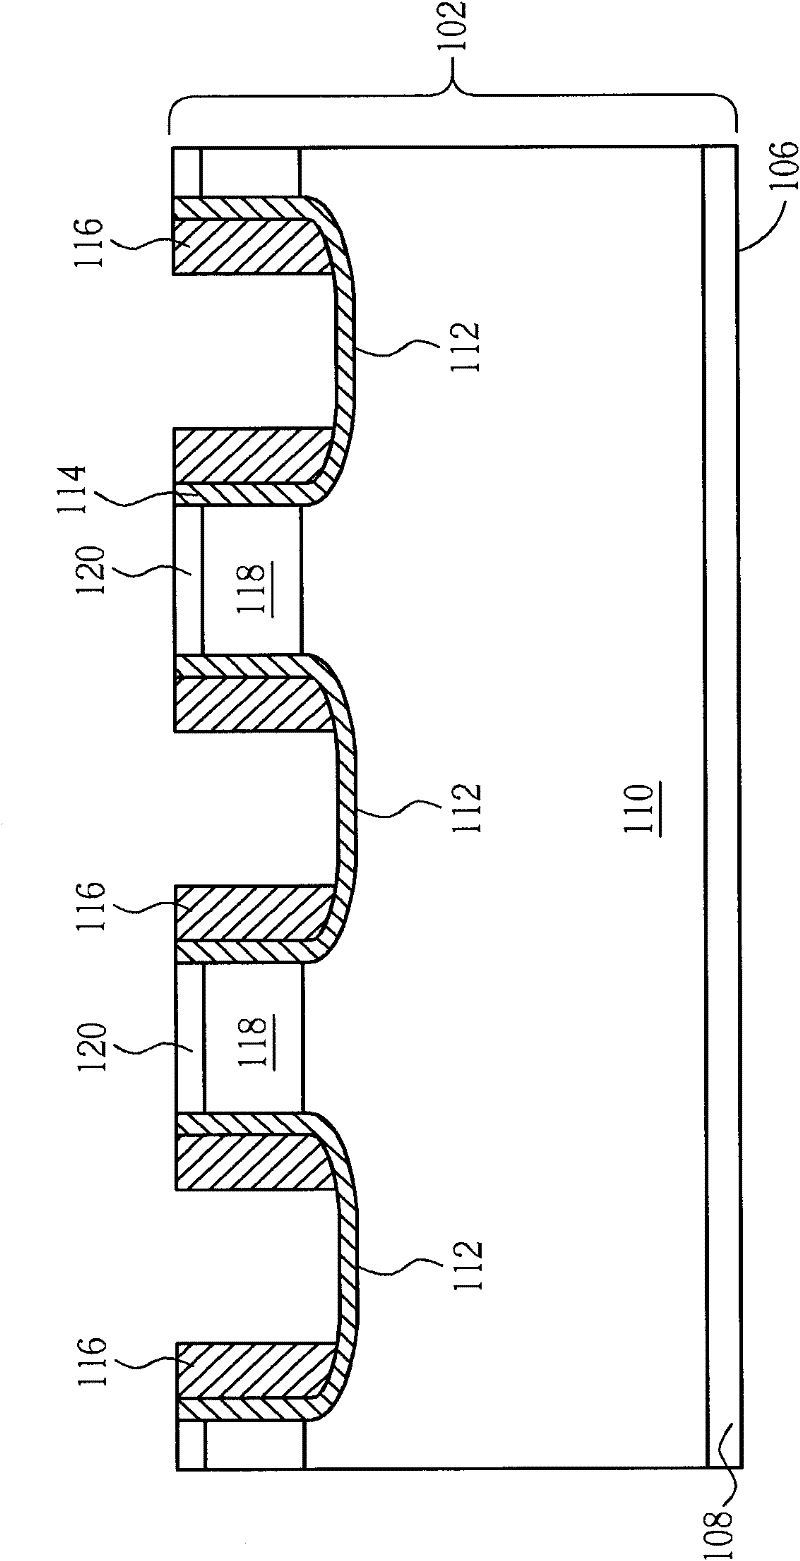 Overlapped trench gate semiconductor component and manufacturing method thereof